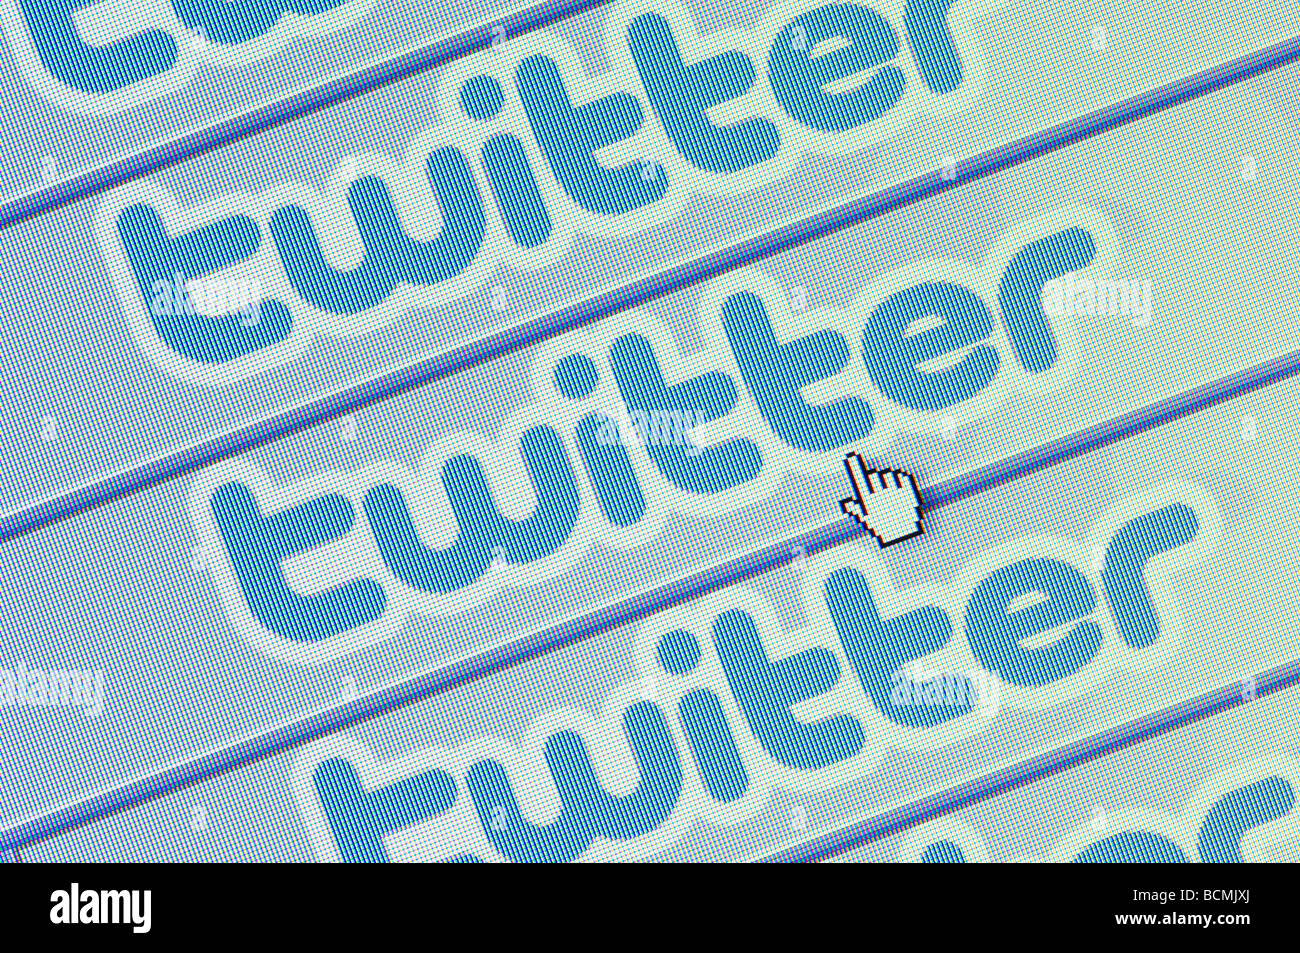 Macro screenshot of the Twitter social networking and micro-blogging website showing multiple Twitter logos (Editorial use only) Stock Photo